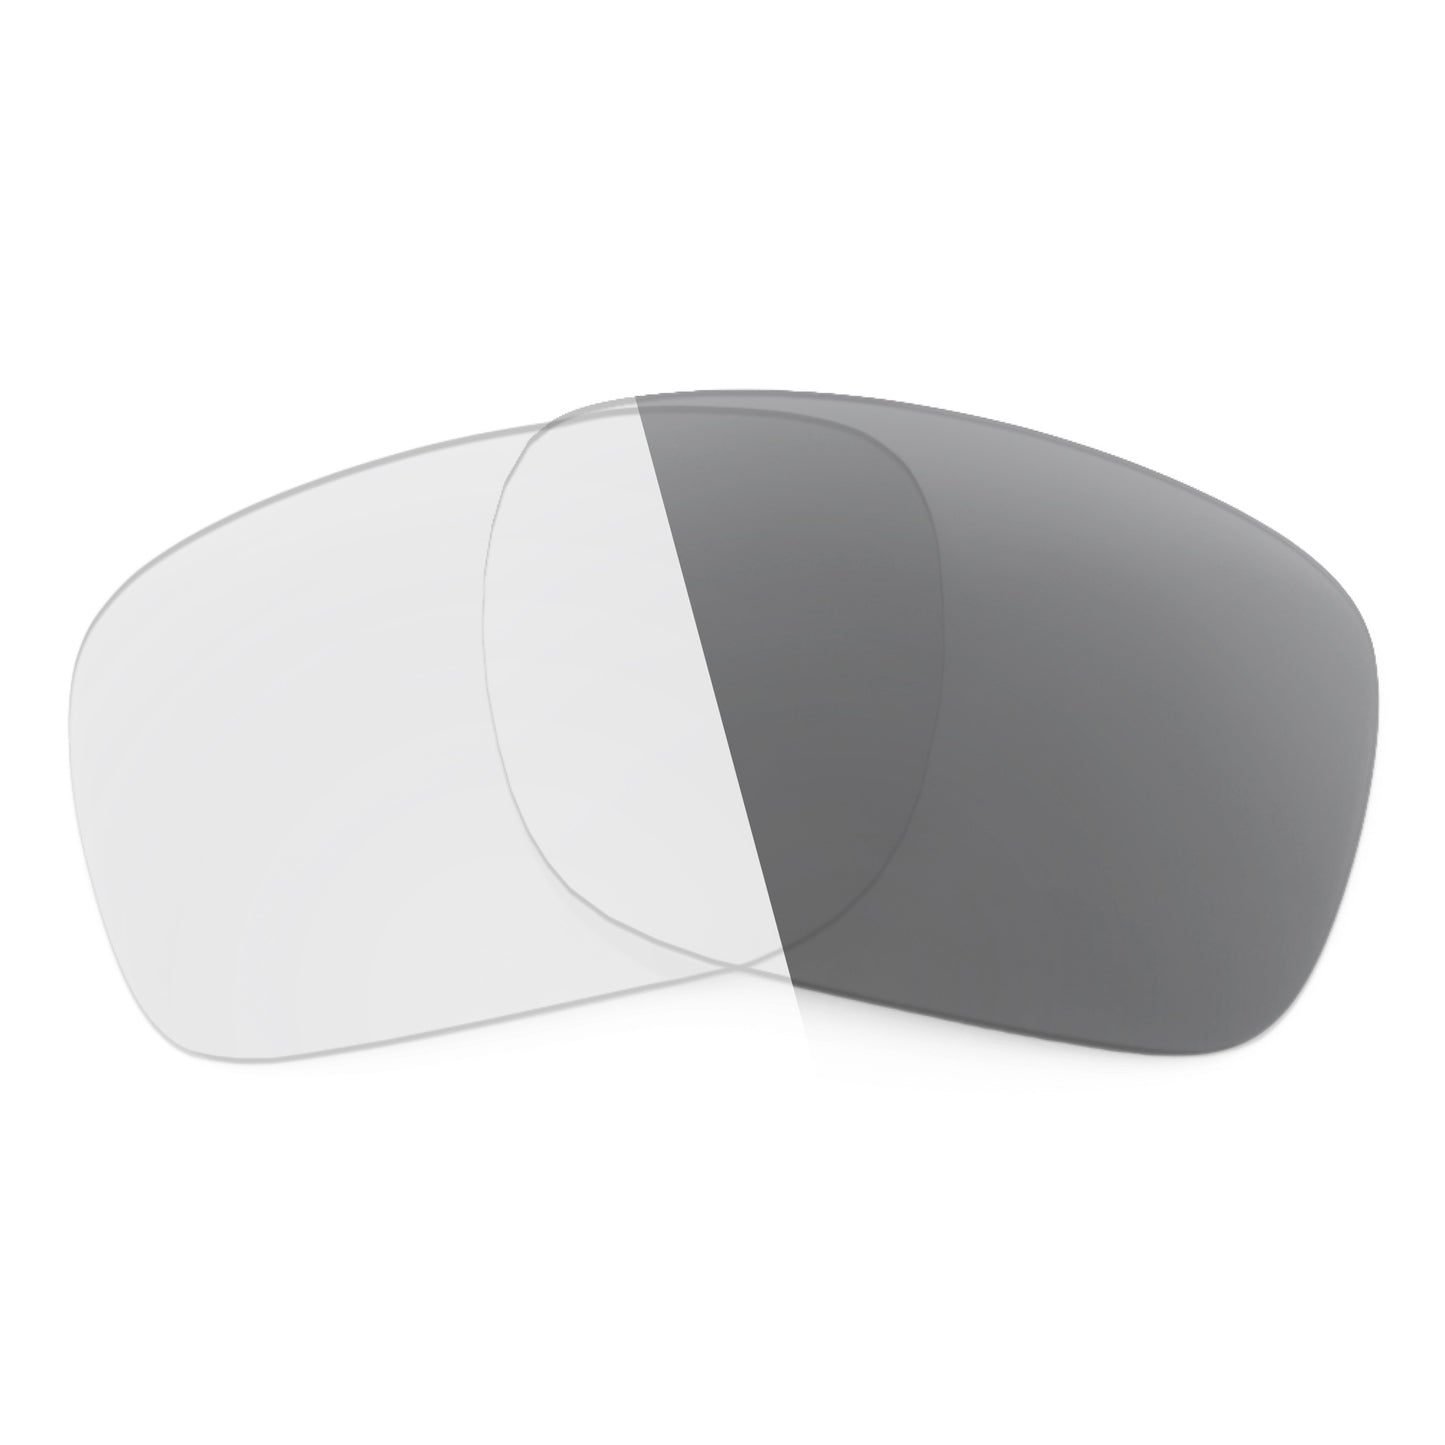 Revant replacement lenses for Ray-Ban RB8309 59mm Non-Polarized Adapt Gray Photochromic